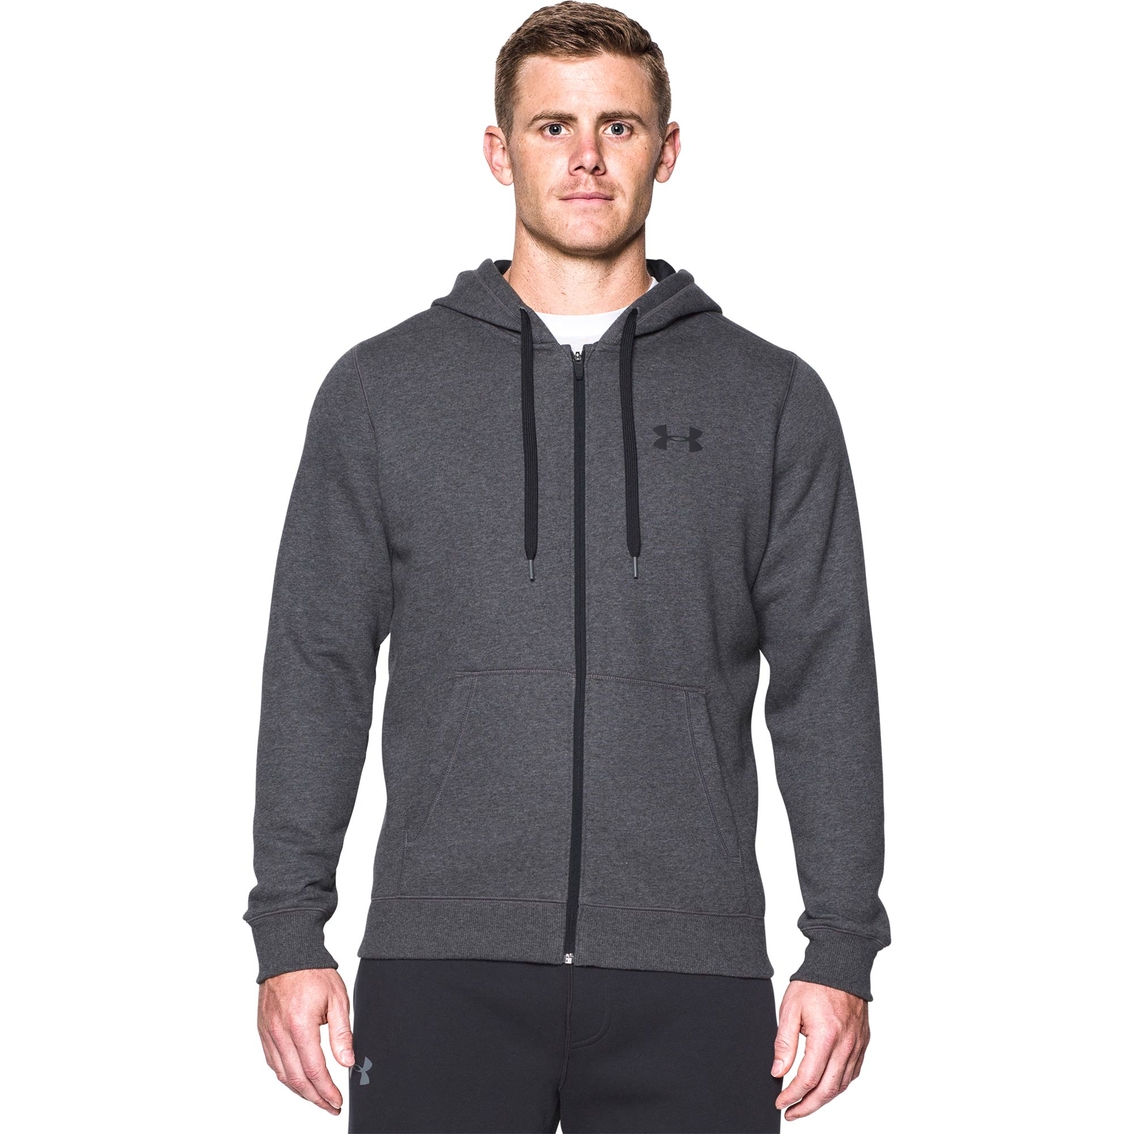 Under Armour Rival Fitted Full Zip Hoodie | Hoodies & Jackets | Clothing & Accessories | Shop The